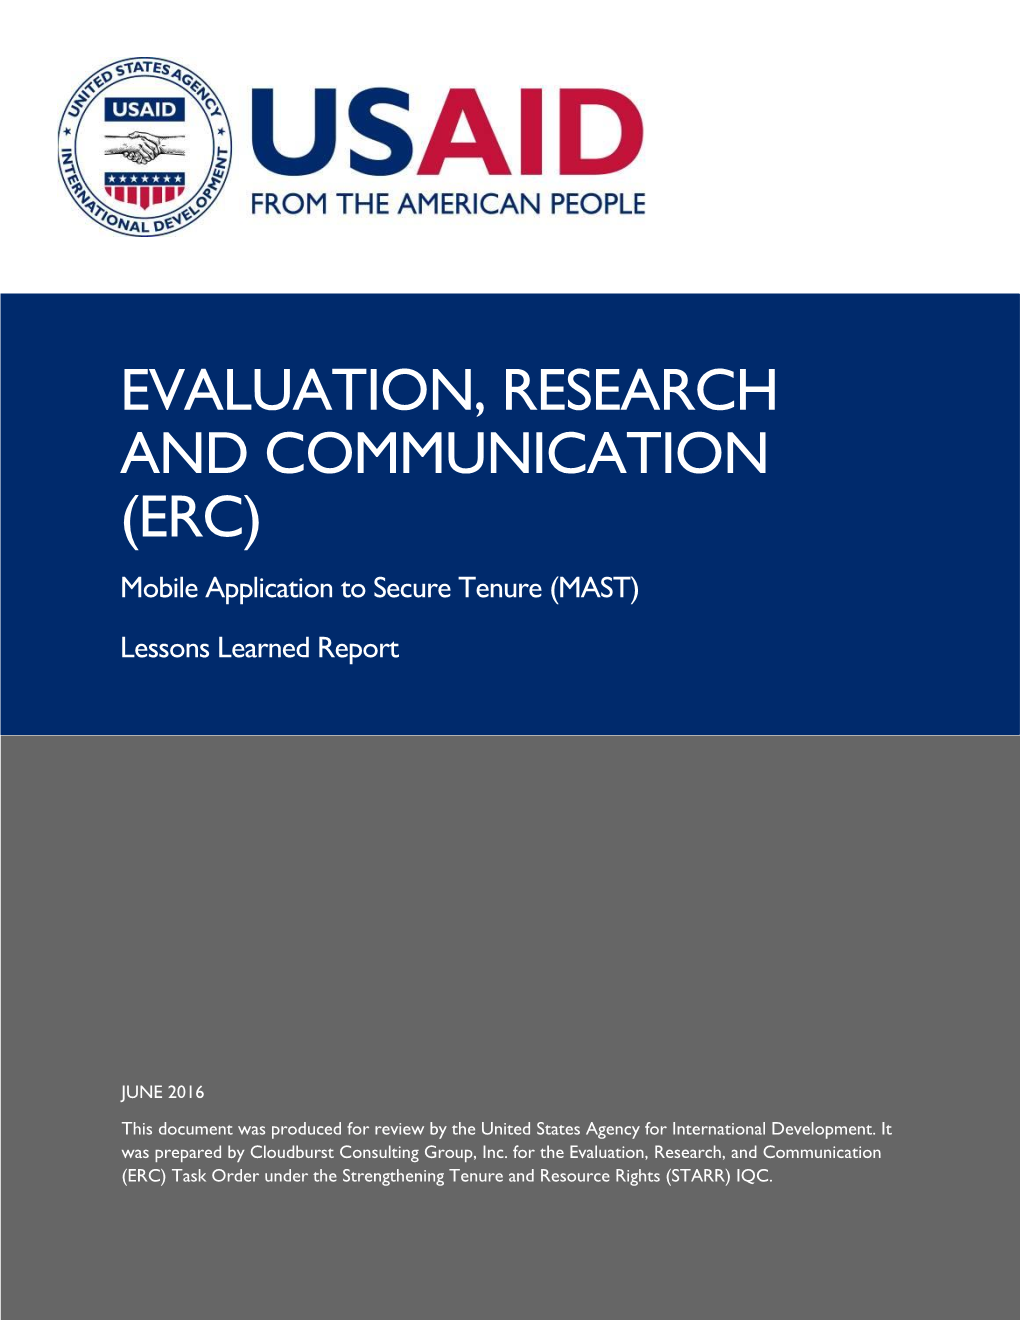 EVALUATION, RESEARCH and COMMUNICATION (ERC) Mobile Application to Secure Tenure (MAST) Lessons Learned Report